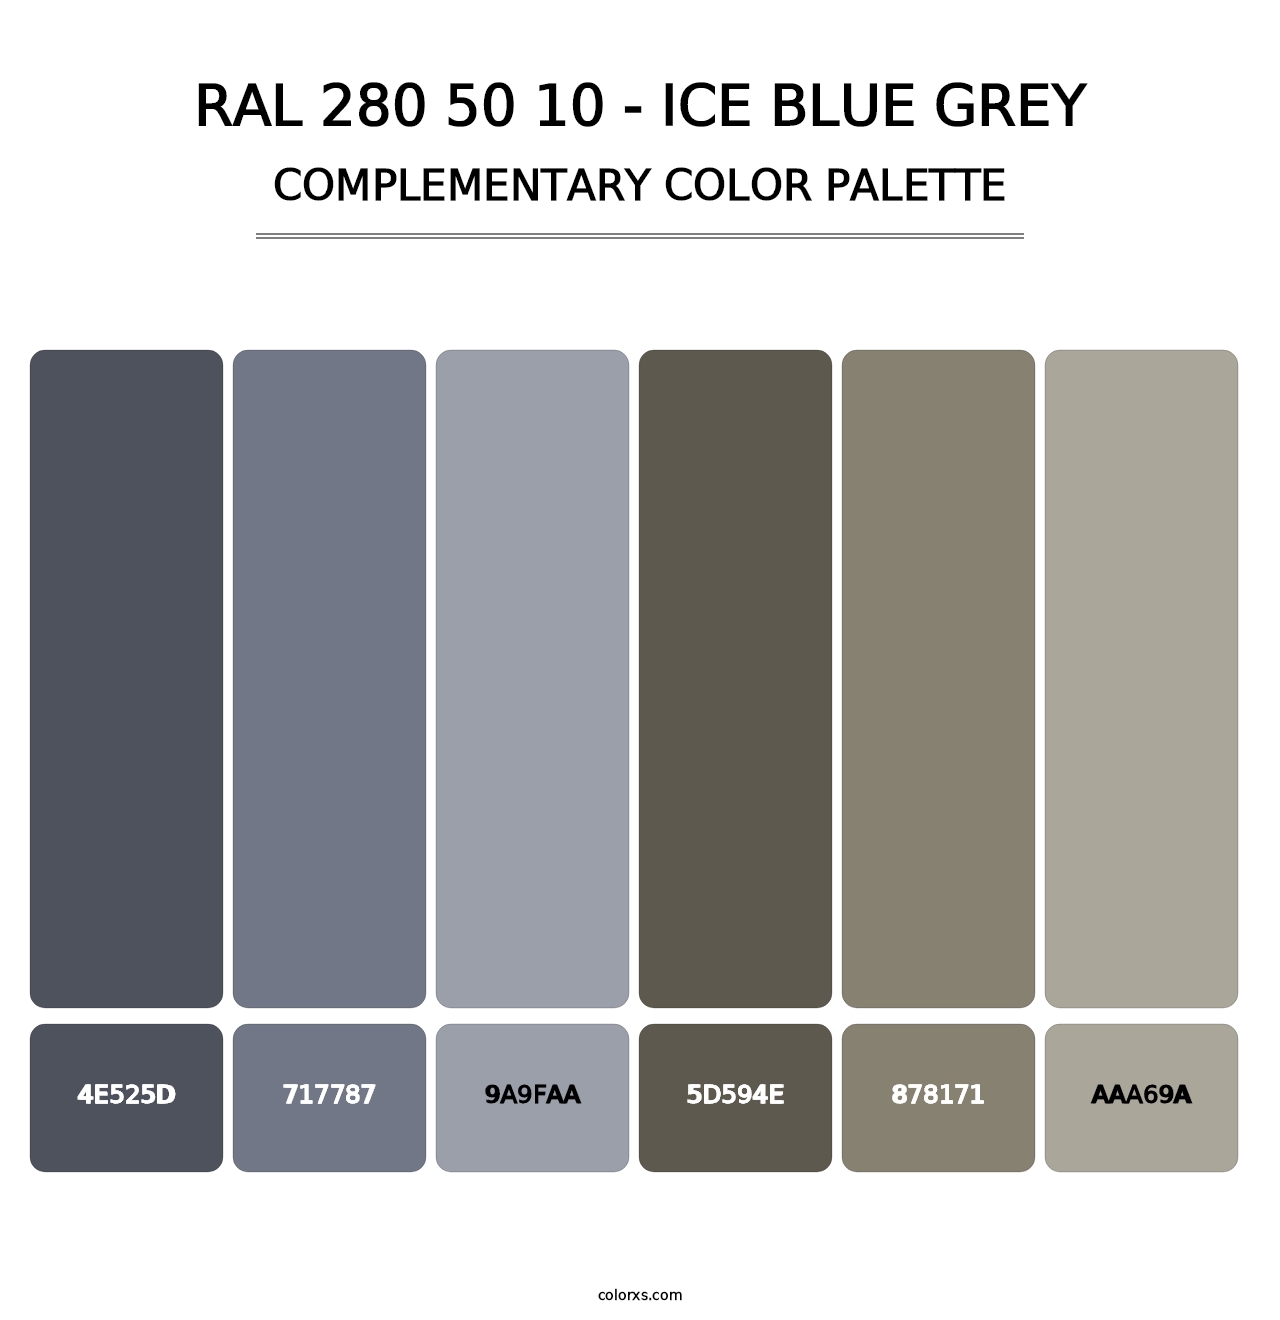 RAL 280 50 10 - Ice Blue Grey - Complementary Color Palette